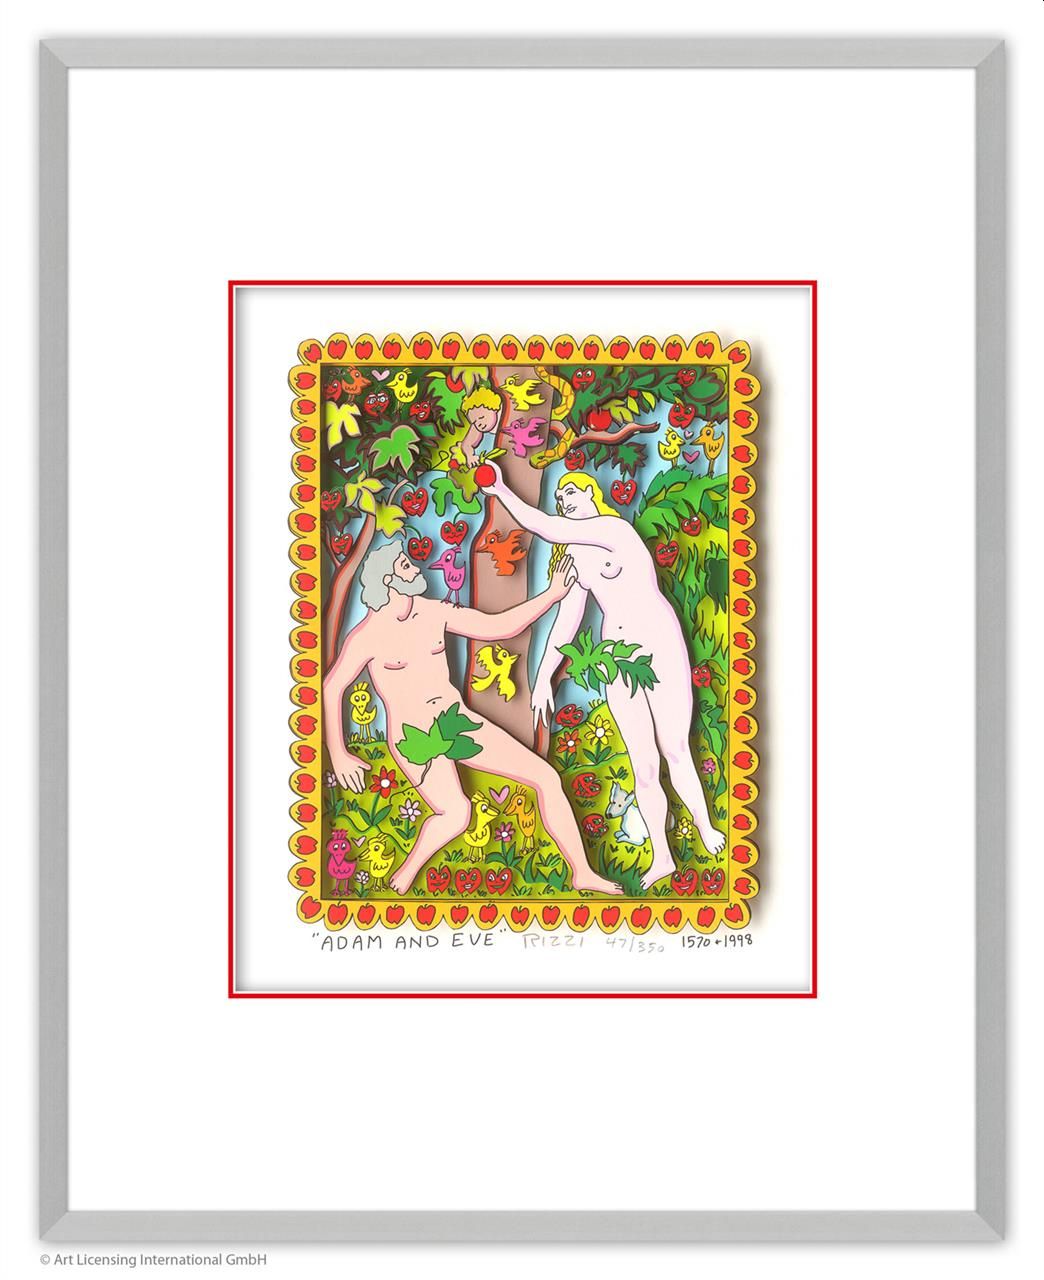 James Rizzi - ADAM AND EVE 